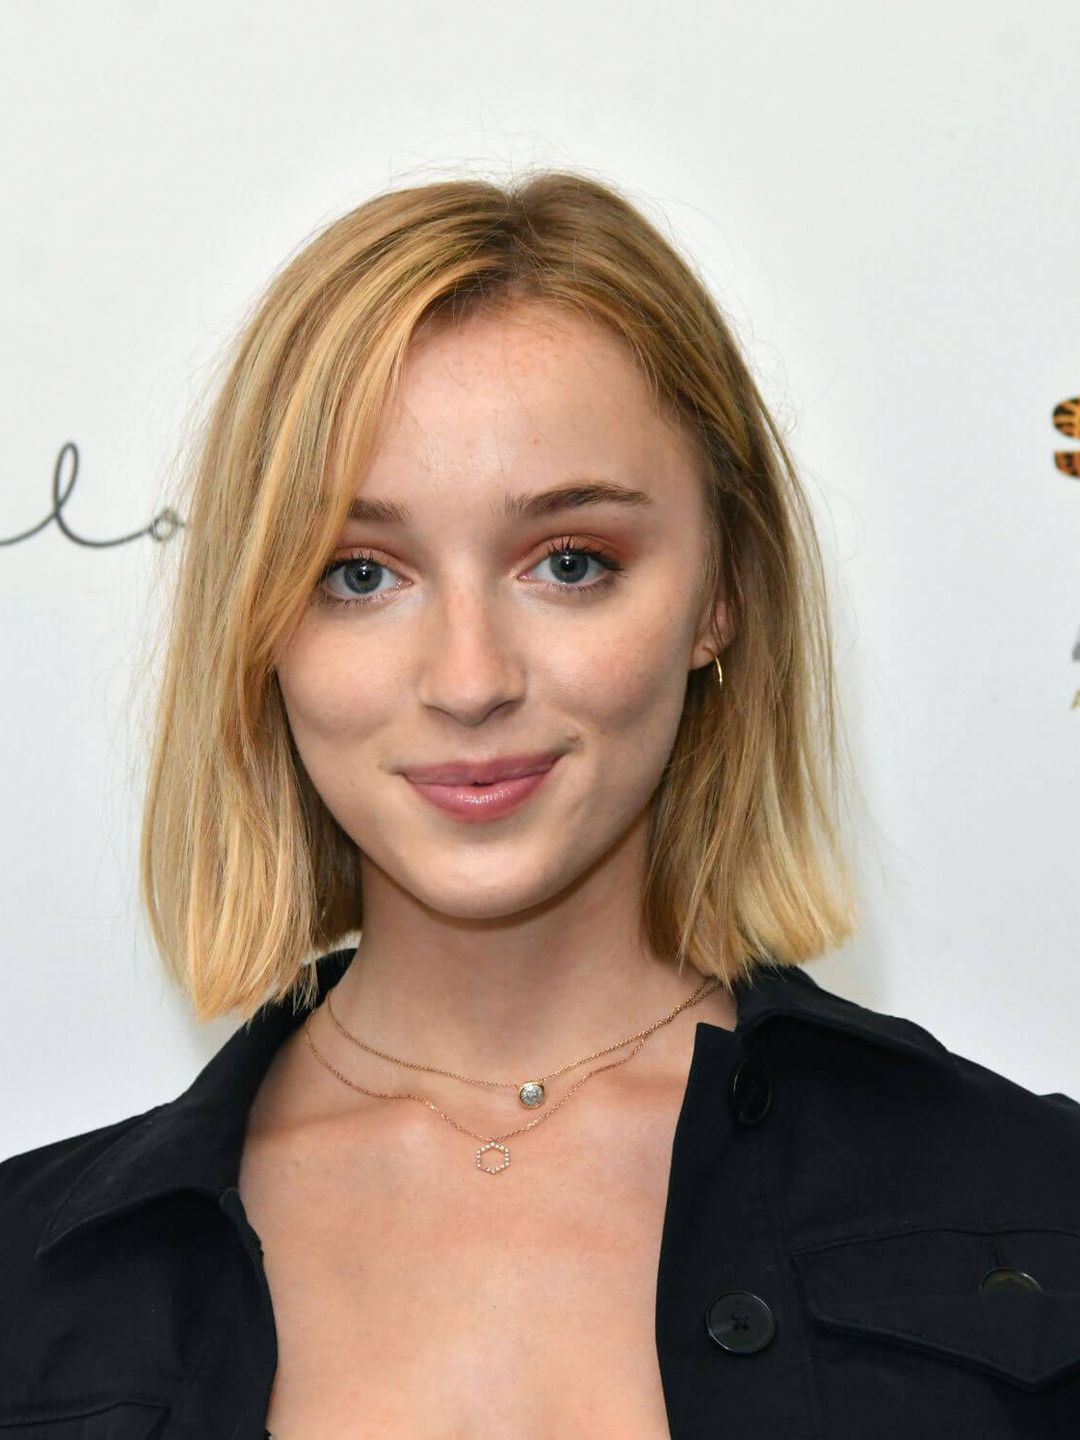 Phoebe Dynevor young pics